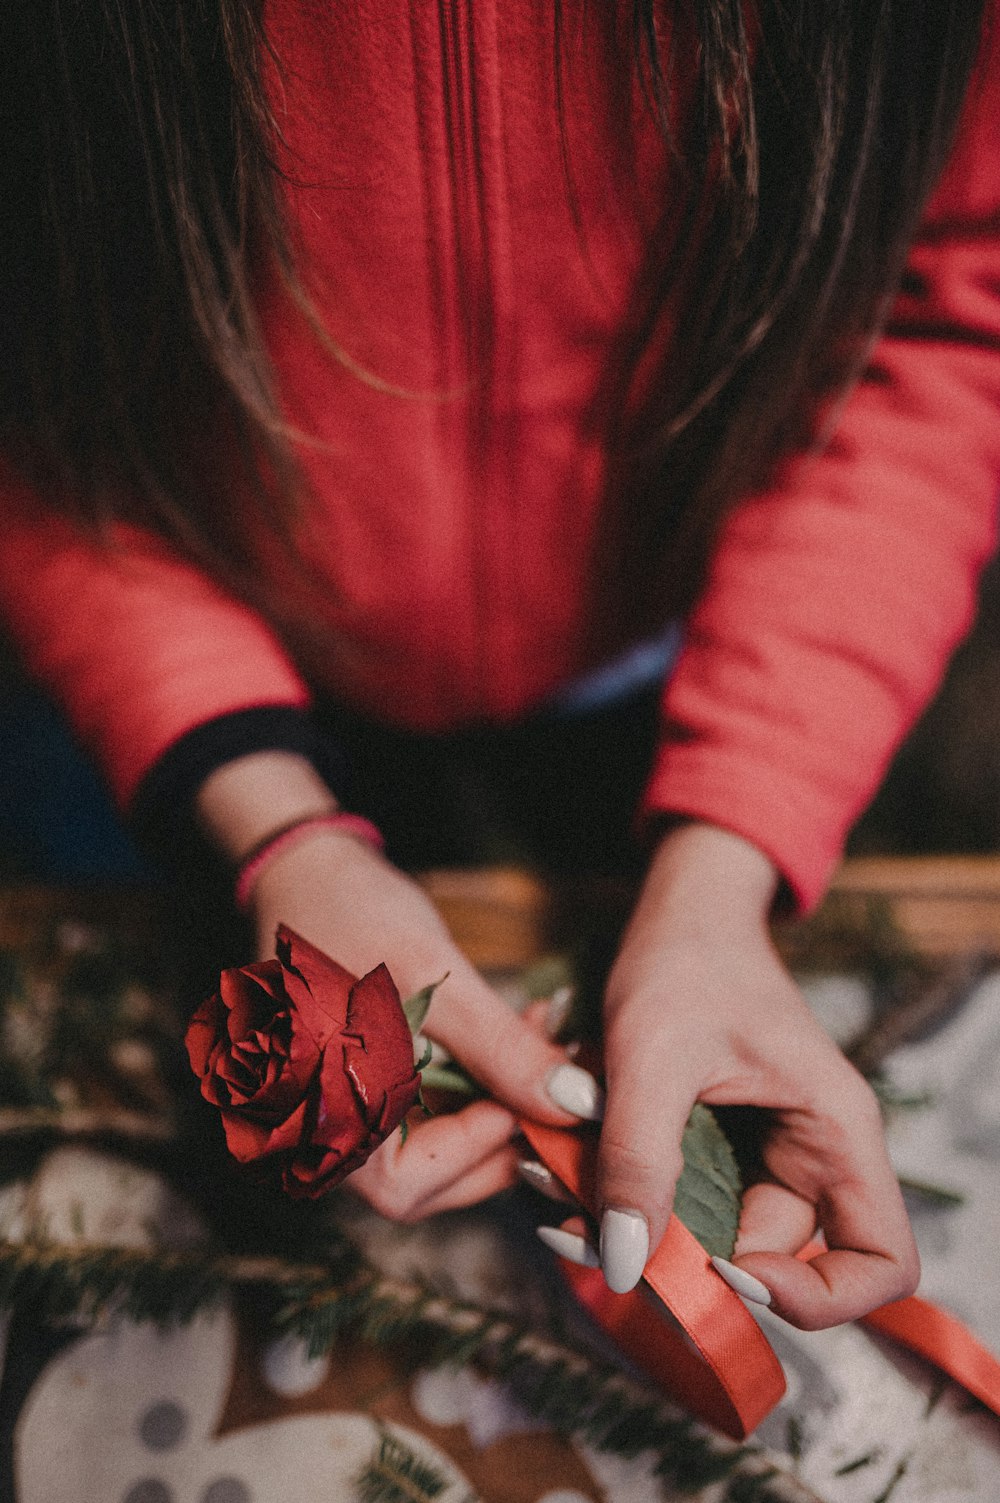 person holding red rose flower and red ribbon